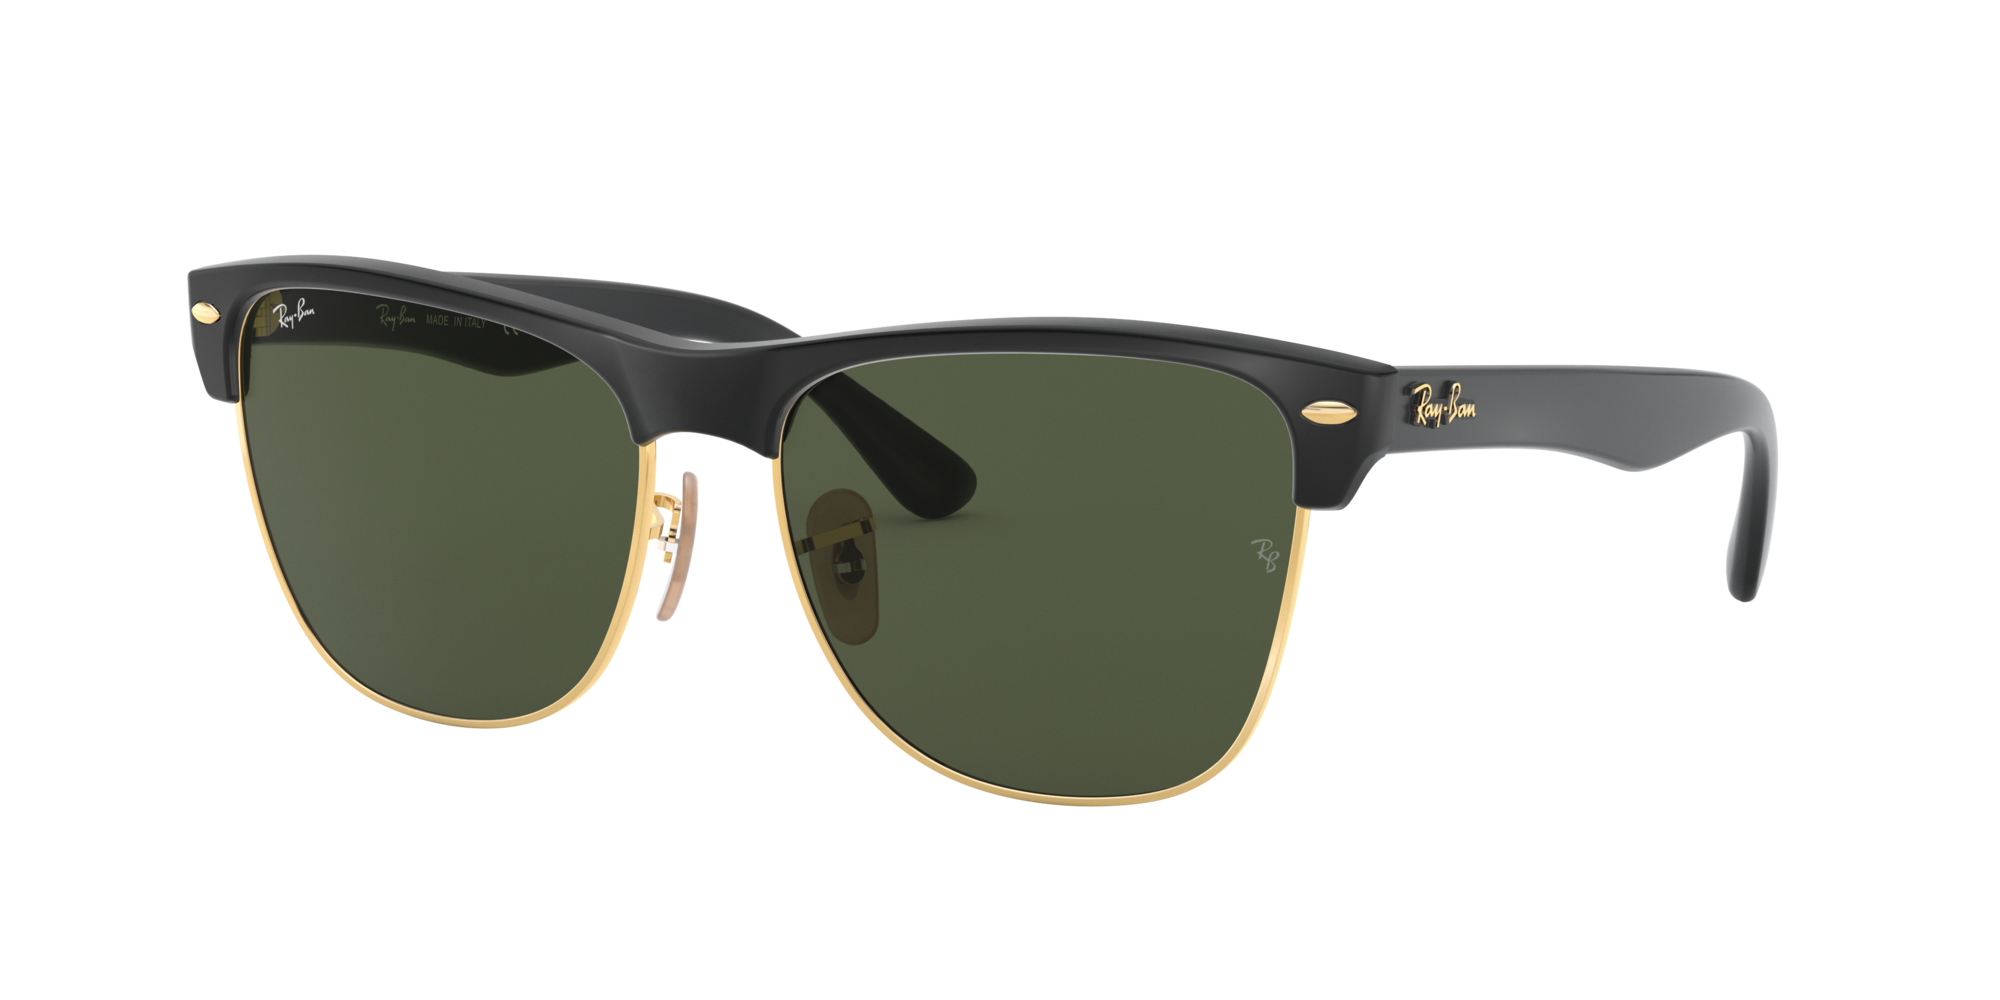 ray ban clubmaster 57mm